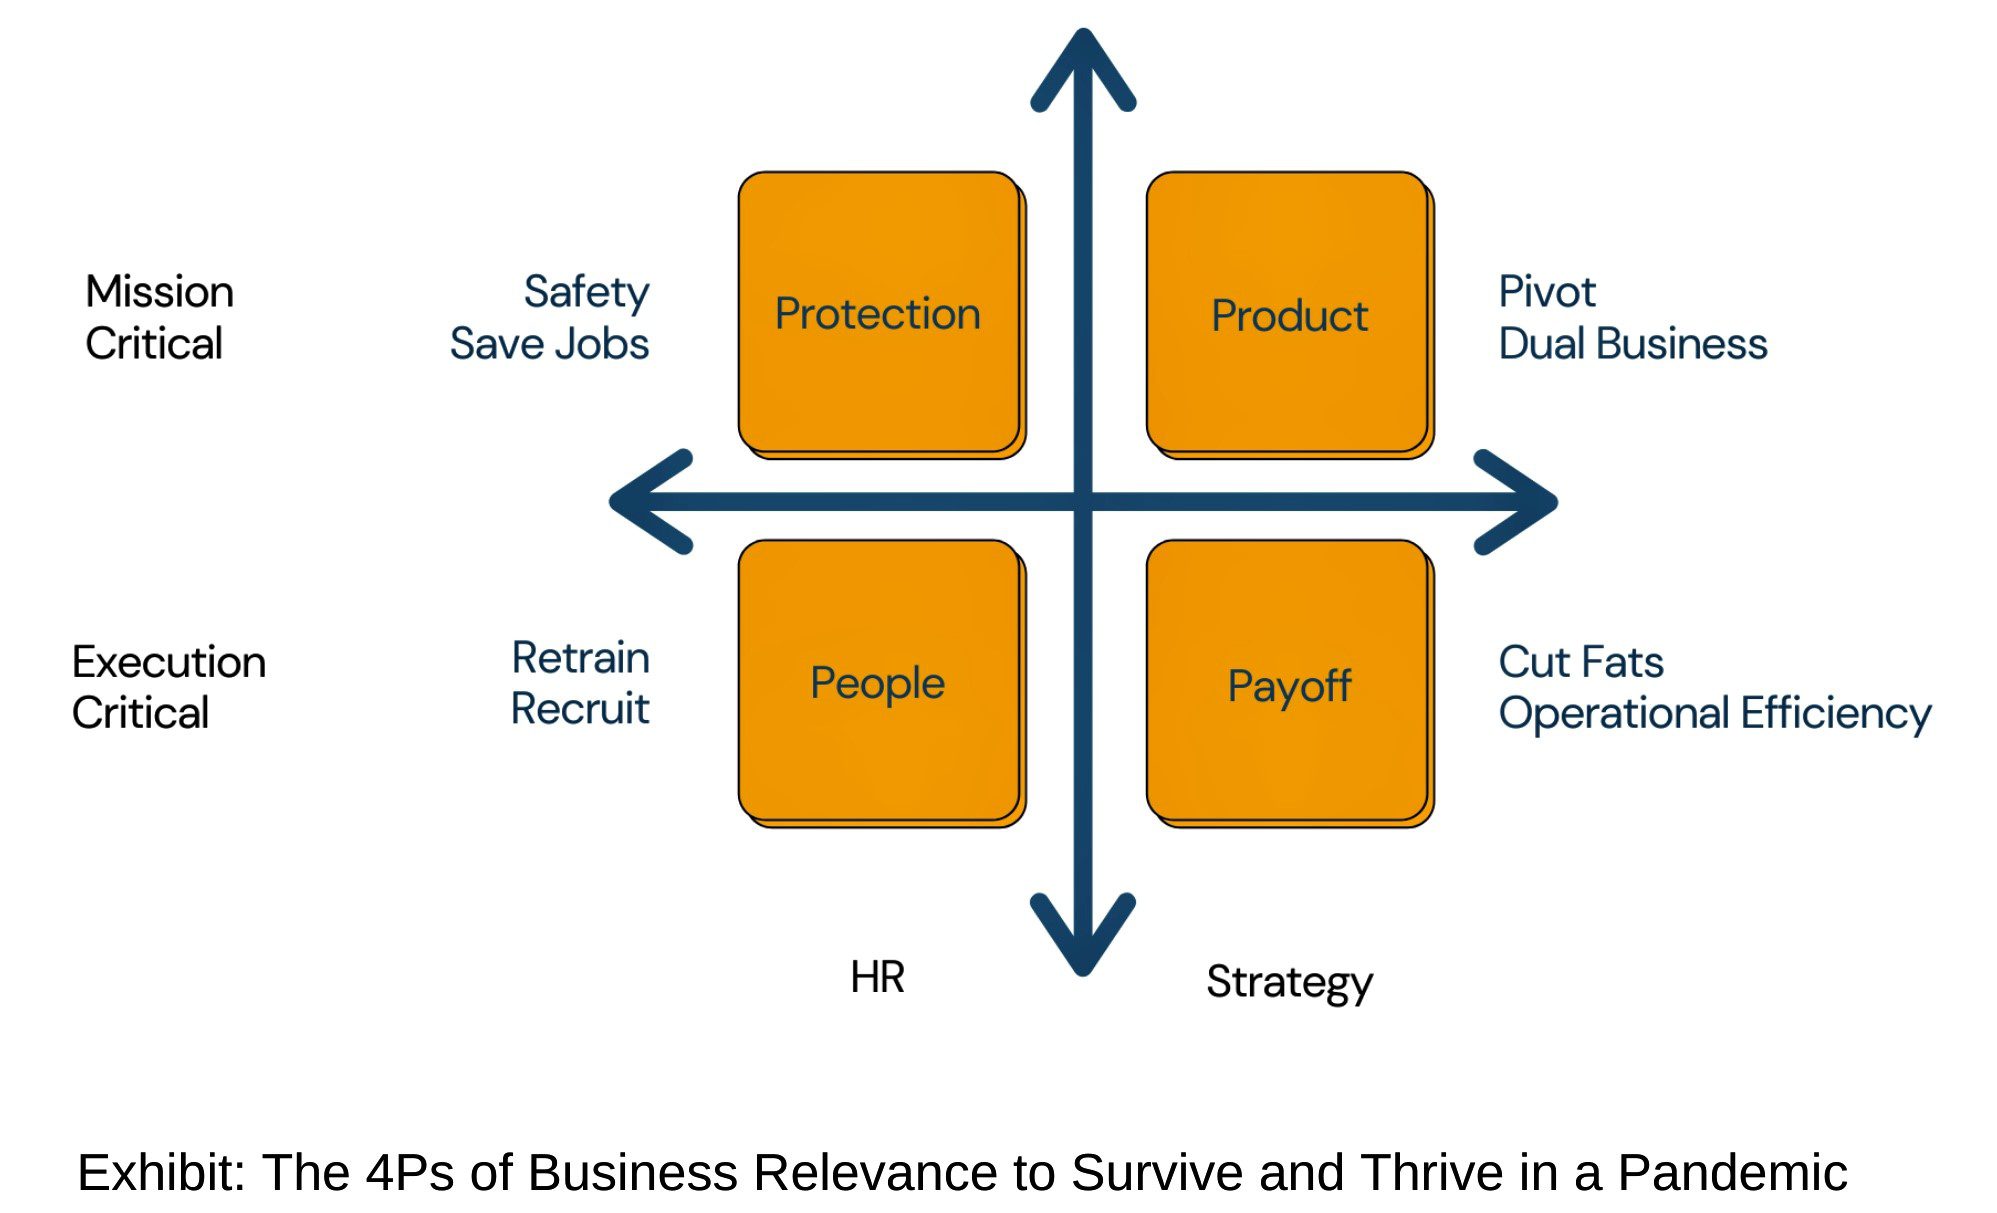 The 4 Ps of Business Relevance to Survive and Thrive During a Pandemic